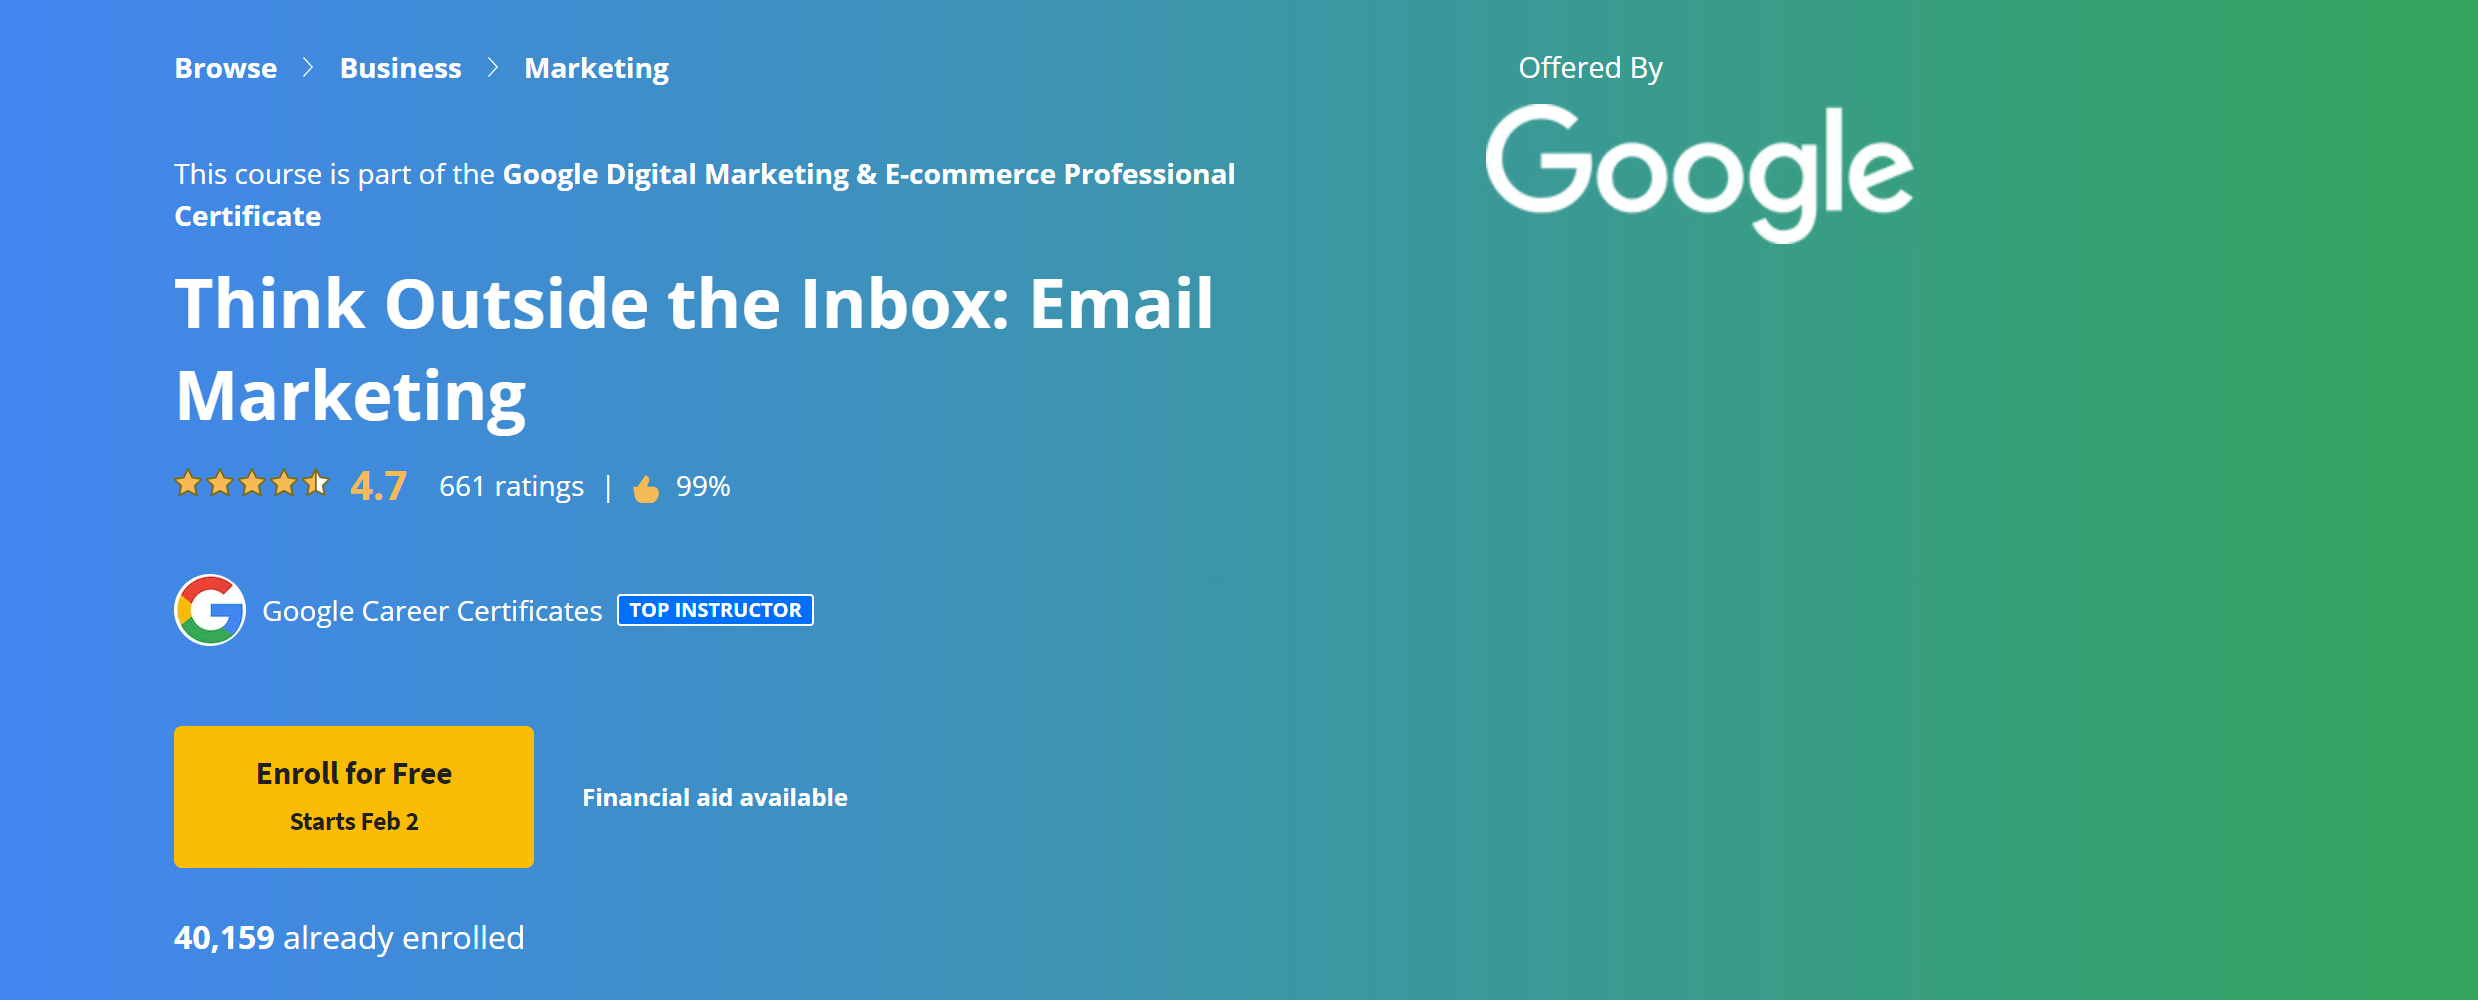 Think outside the inbox email marketing